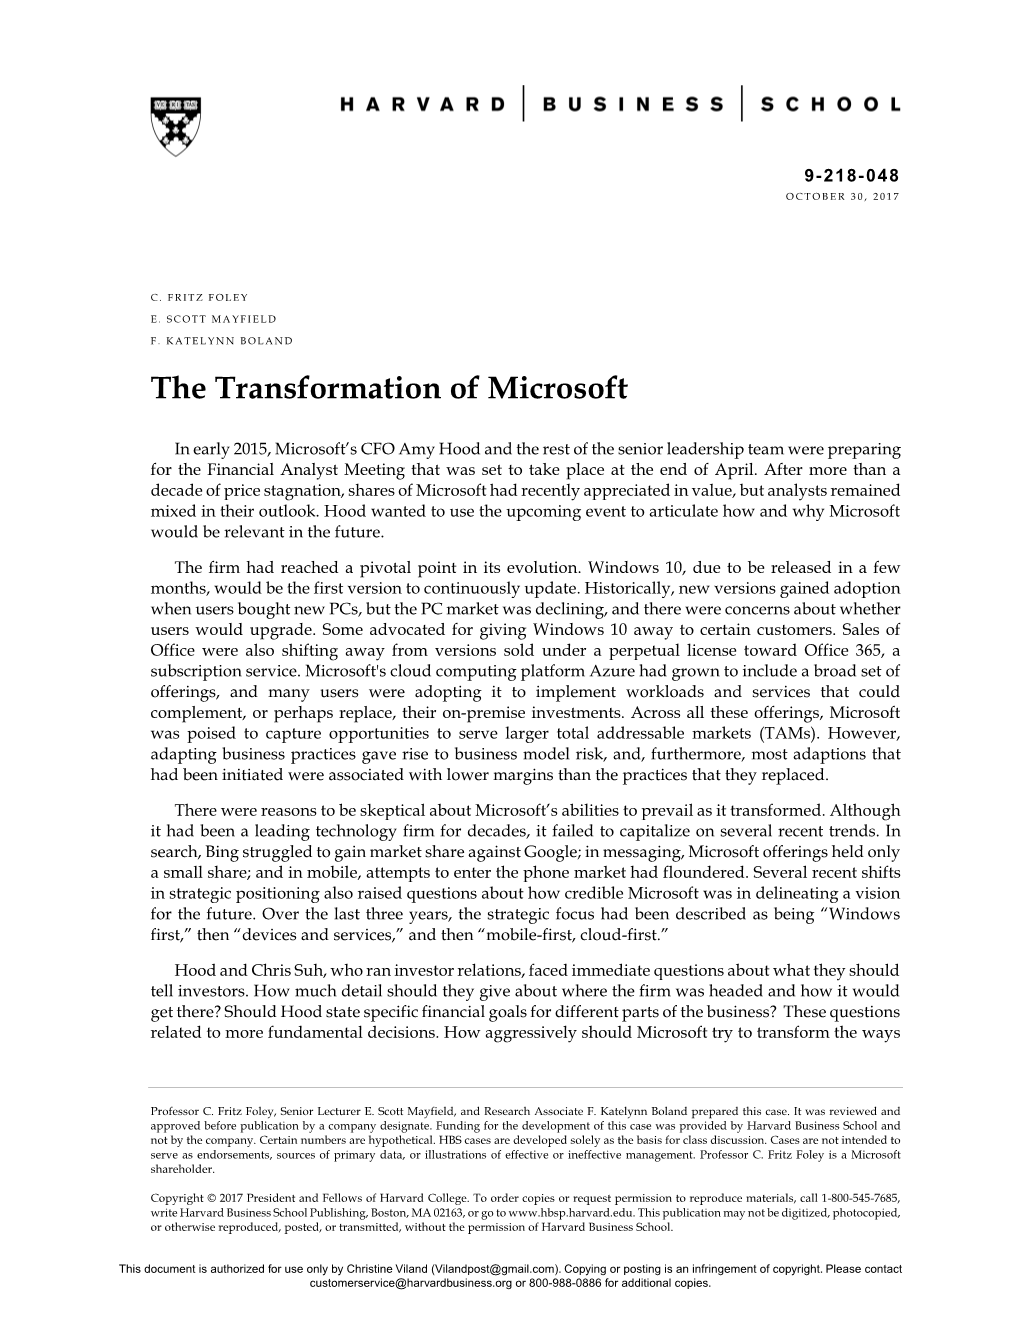 HBR Case Study on the Transformation of Microsoft